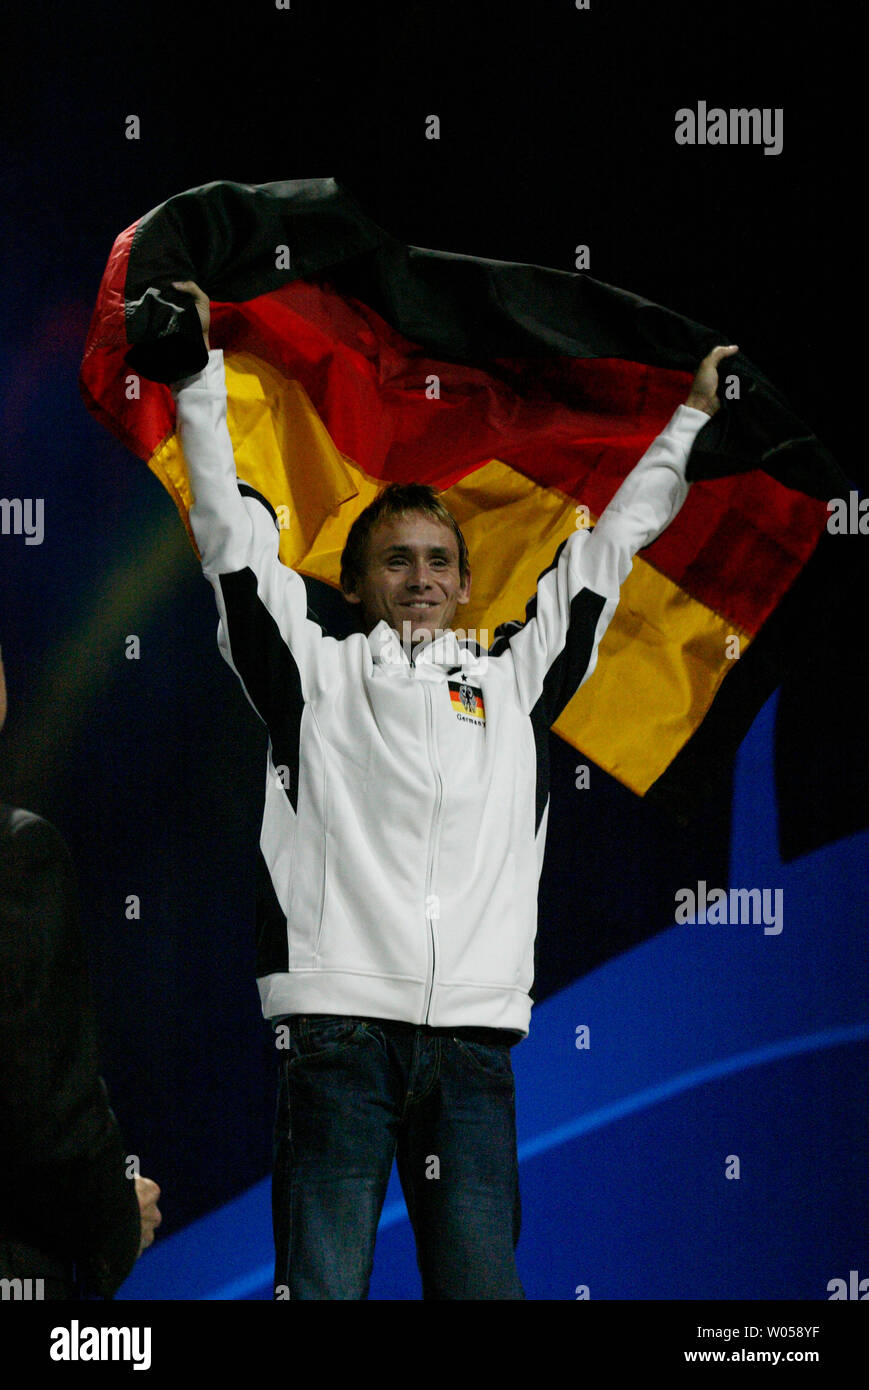 FIFA Soccer 07 Gold Medal winer Daniel Schellhase, of Germany, waves the German flag during the World Cyber Games 2007 Closing Ceremonies held in Seattle on October 7, 2007. Over 700 players from 74 countries participated in the four day grand finals for medals, prizes and 00,000. (UPI Photo/Jim Bryant). Stock Photo